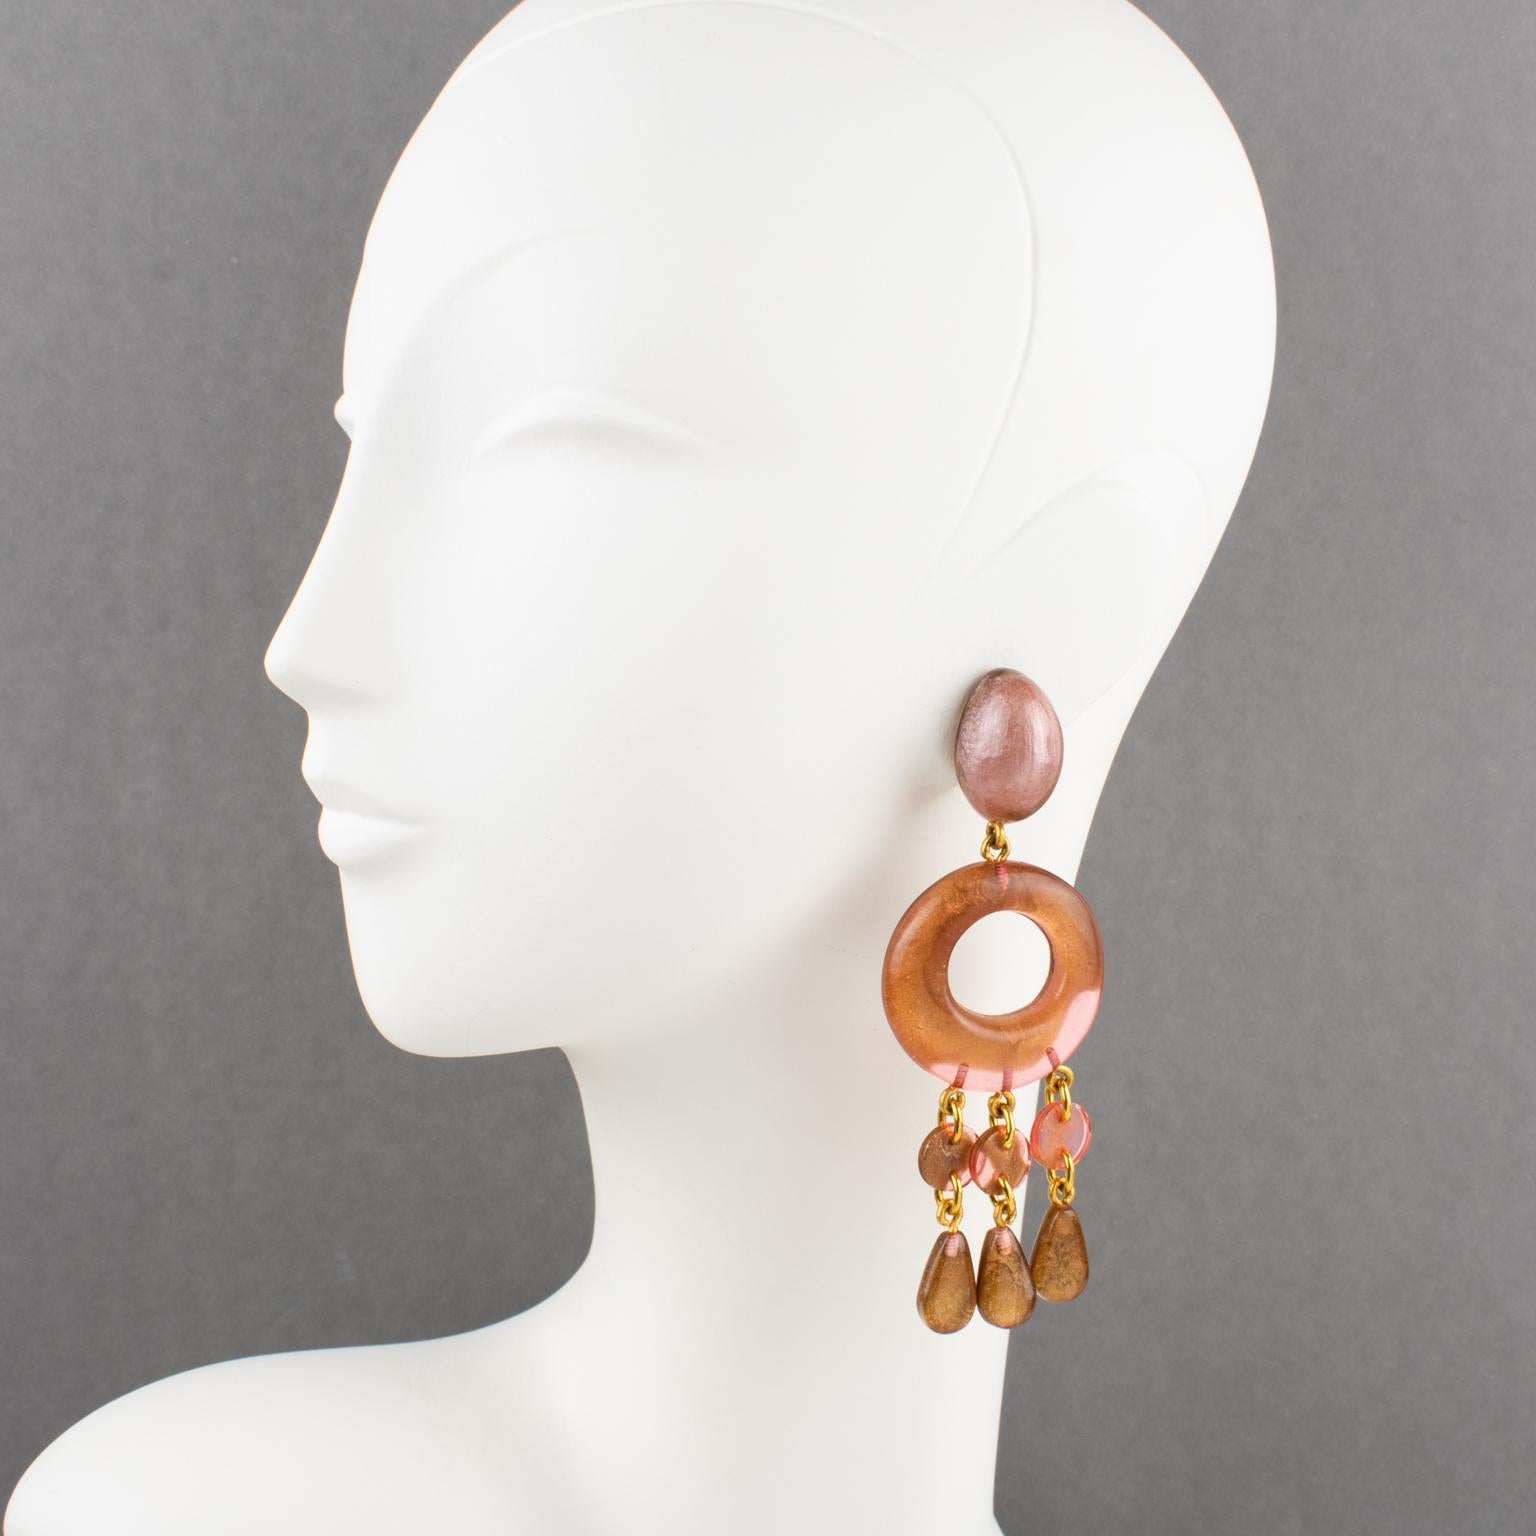 These stunning oversized clip-on earrings by Dominique Denaive Paris boast a sculptural chandelier dangling shape with pearlized carved resin elements and drop charms in a lovely mix of golden brown, rose pink, and lavender-pink colors. The hardware